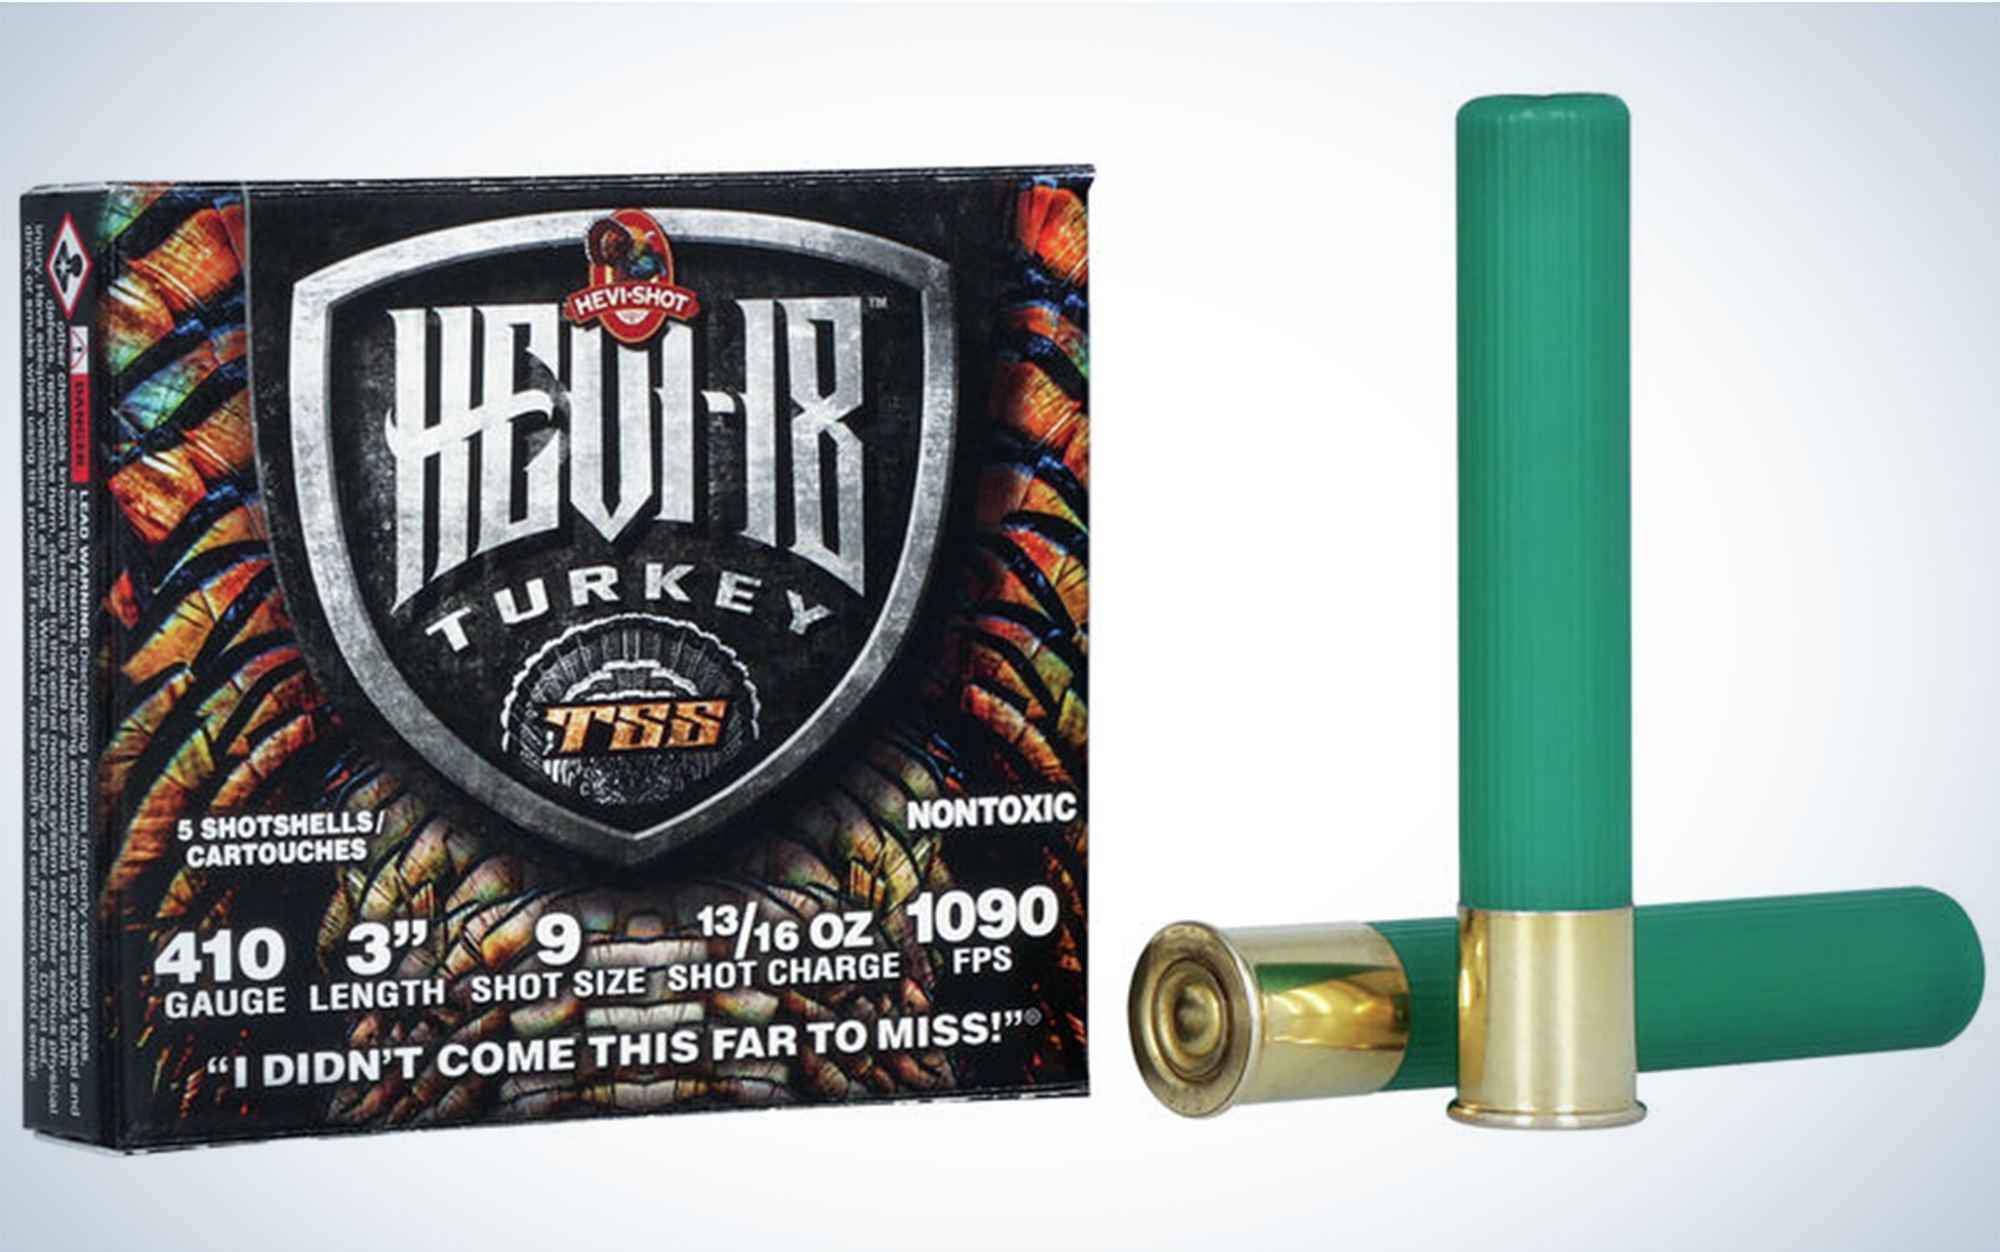 The Hevi Shot Hevi-18 is one of the best .410 turkey loads.